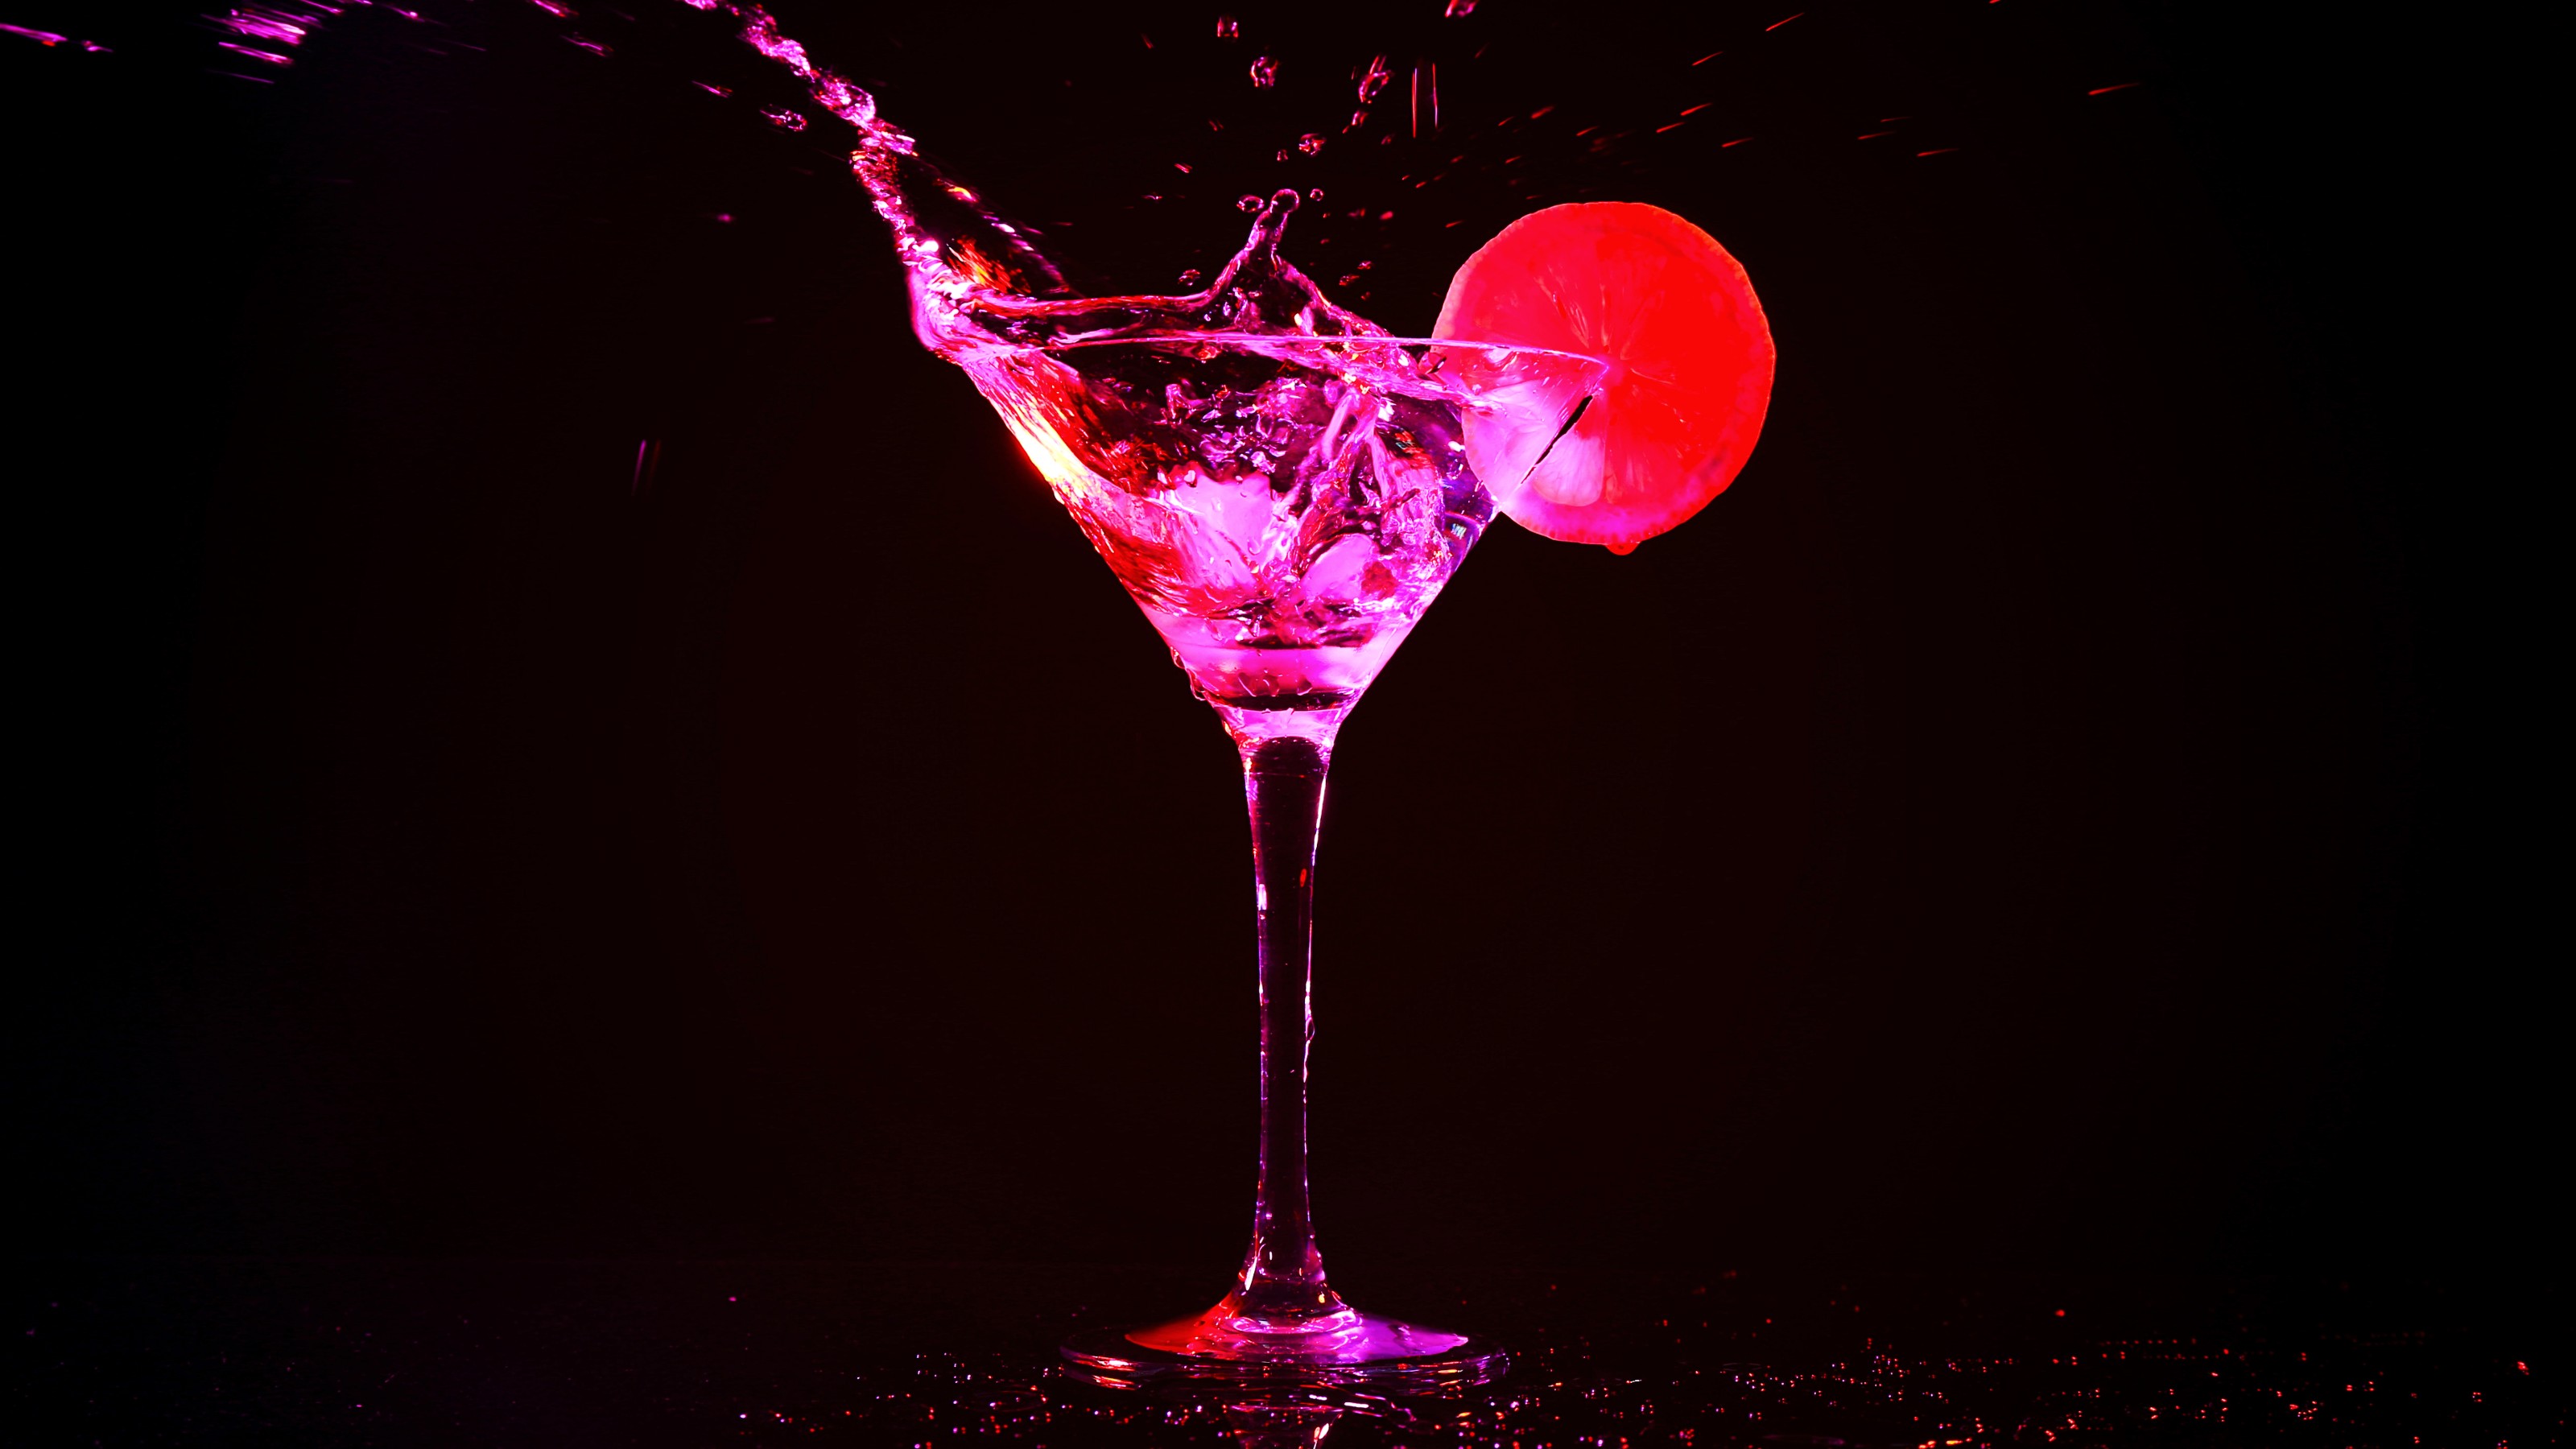 A splash of brightly colored liquid erupts from a martini glass garnished with a red citrus slice against a dark background, hinting at an unexpected hangover remedy.